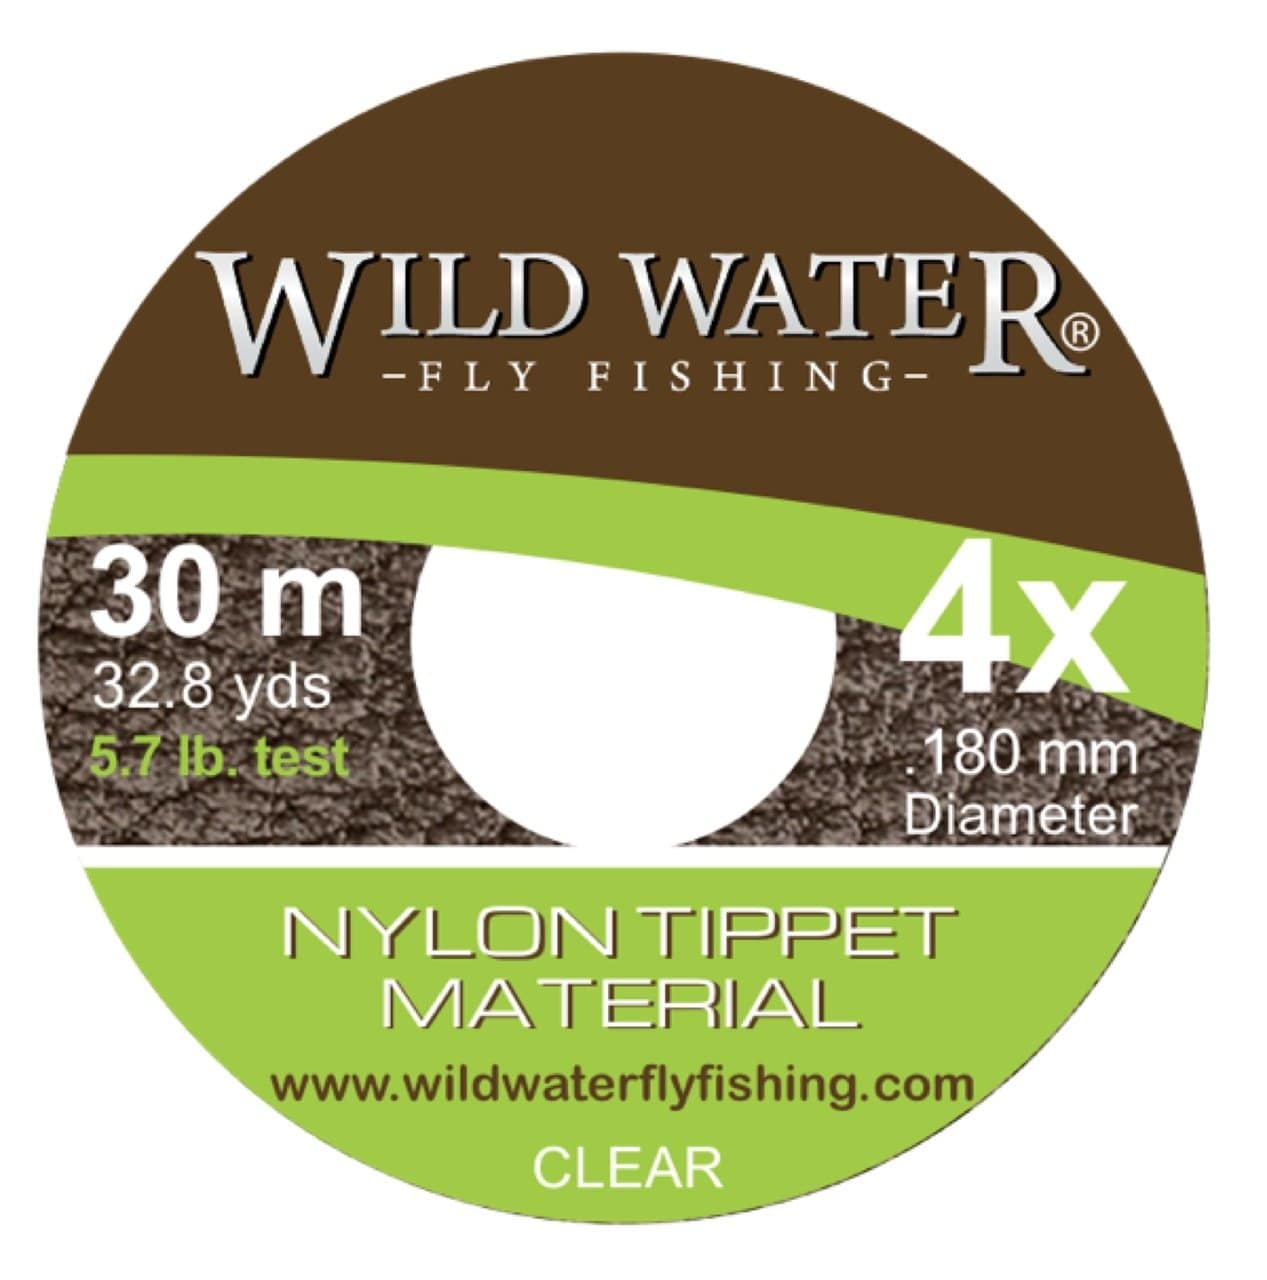 Wild Water Fly Fishing 4X Tippet